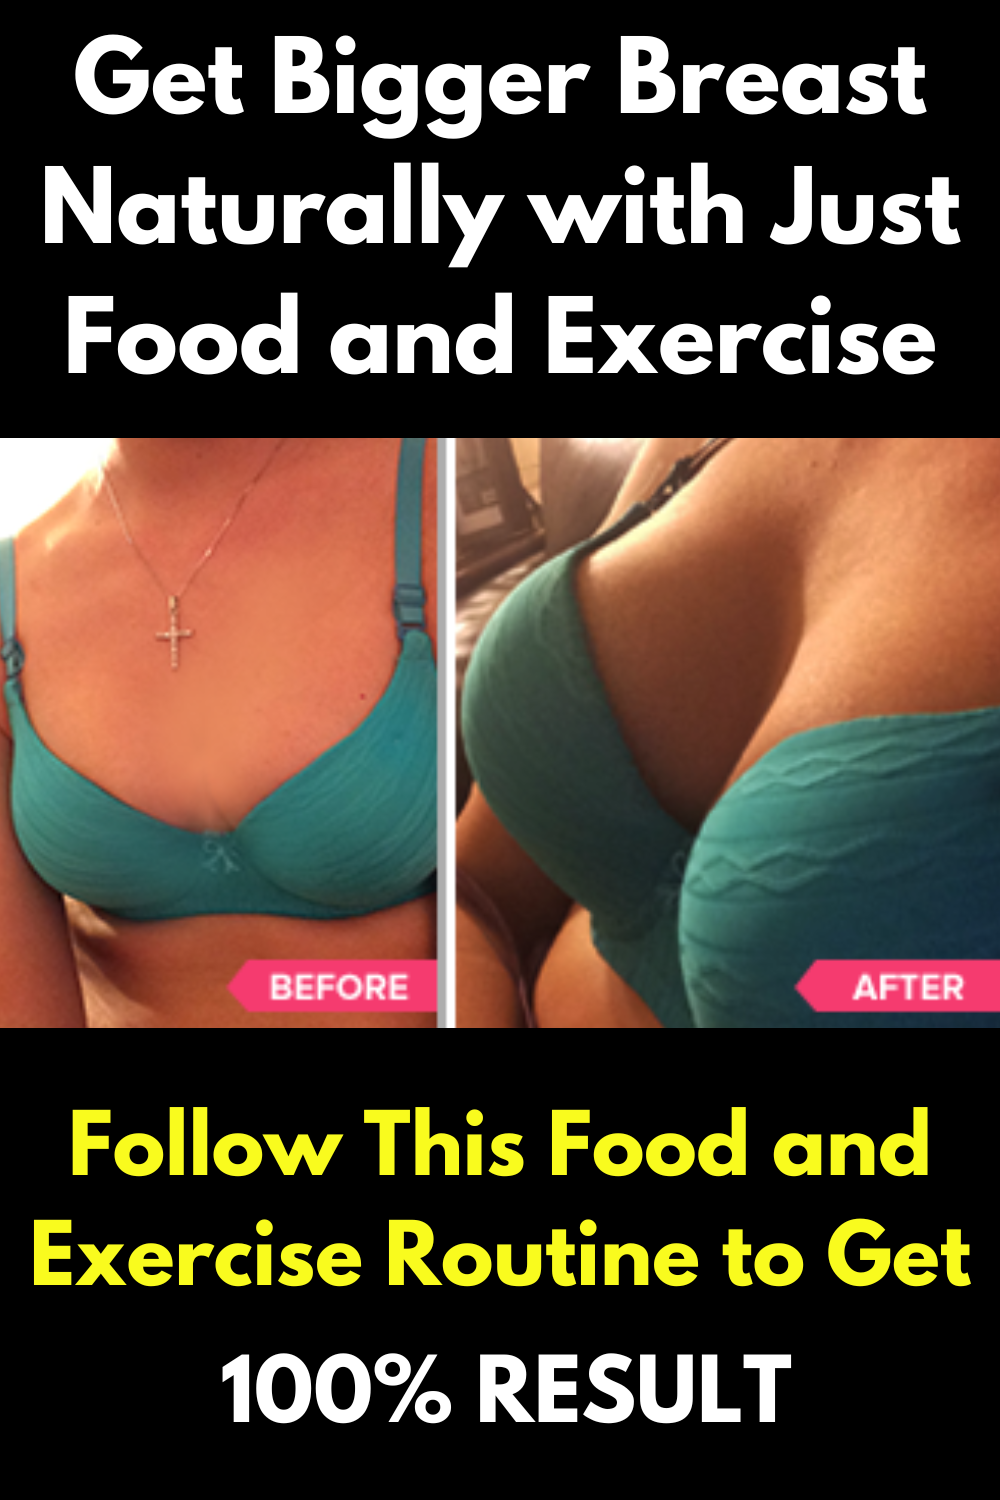 How to get bigger breasts naturally